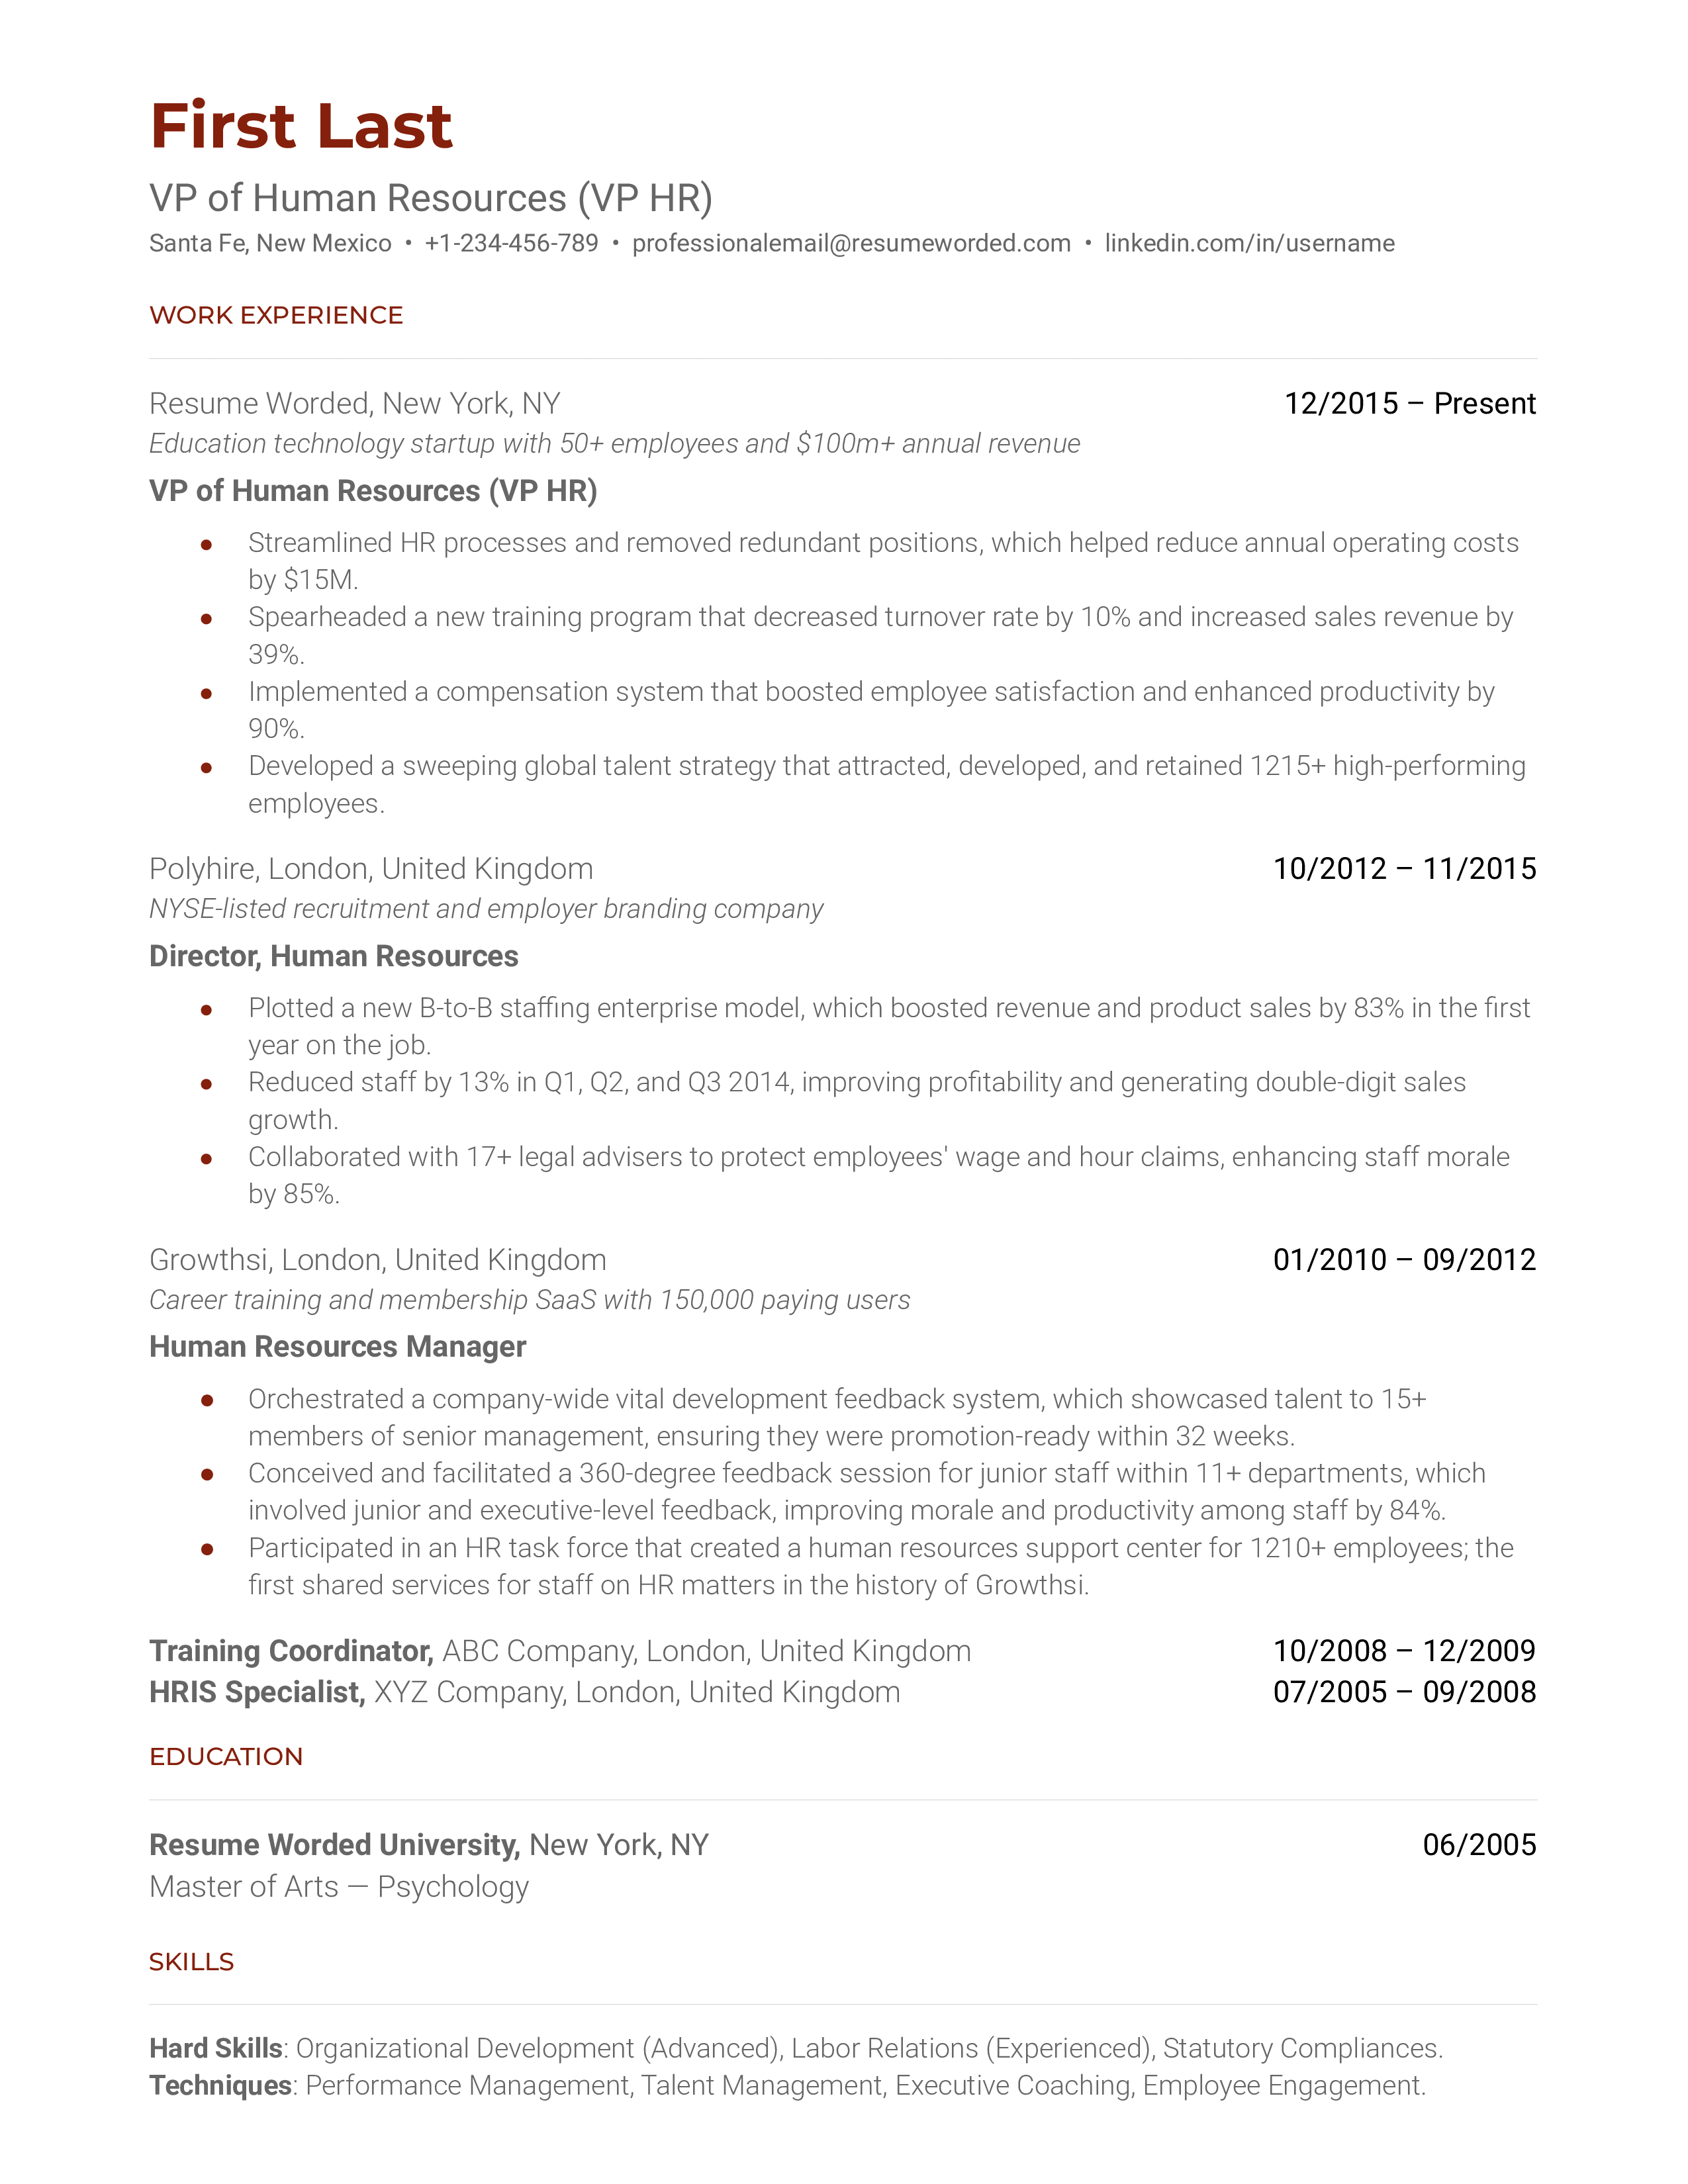 A resume for a VP of human resources with a master's degree in psychology and experience as a human resources manager and director.